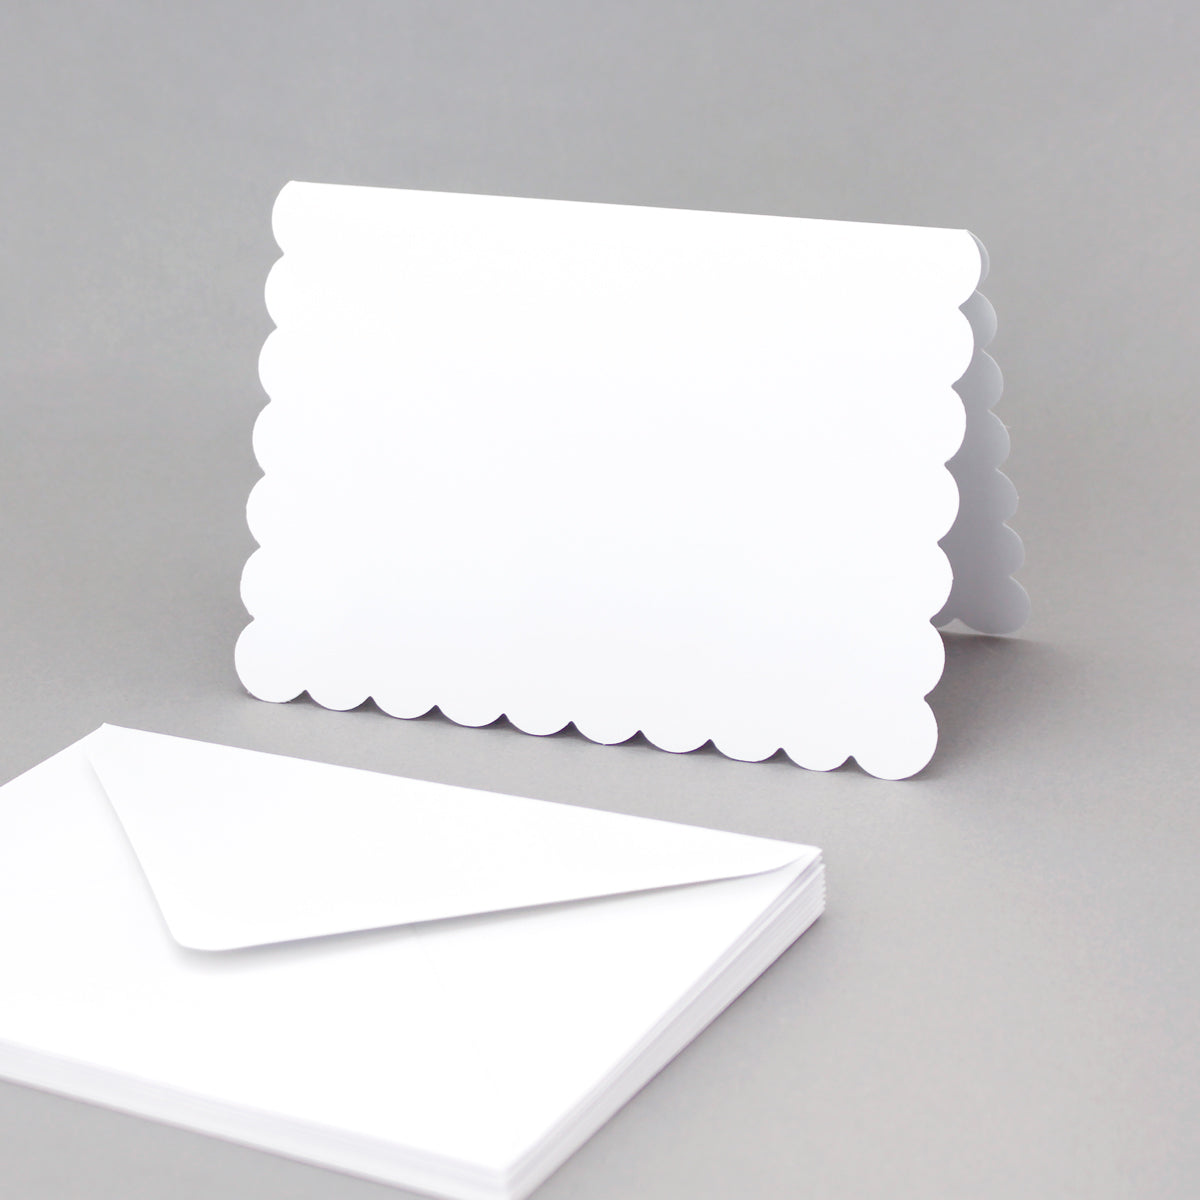 30 White Scalloped Edge Cards & Envelopes in 3 Different Sizes